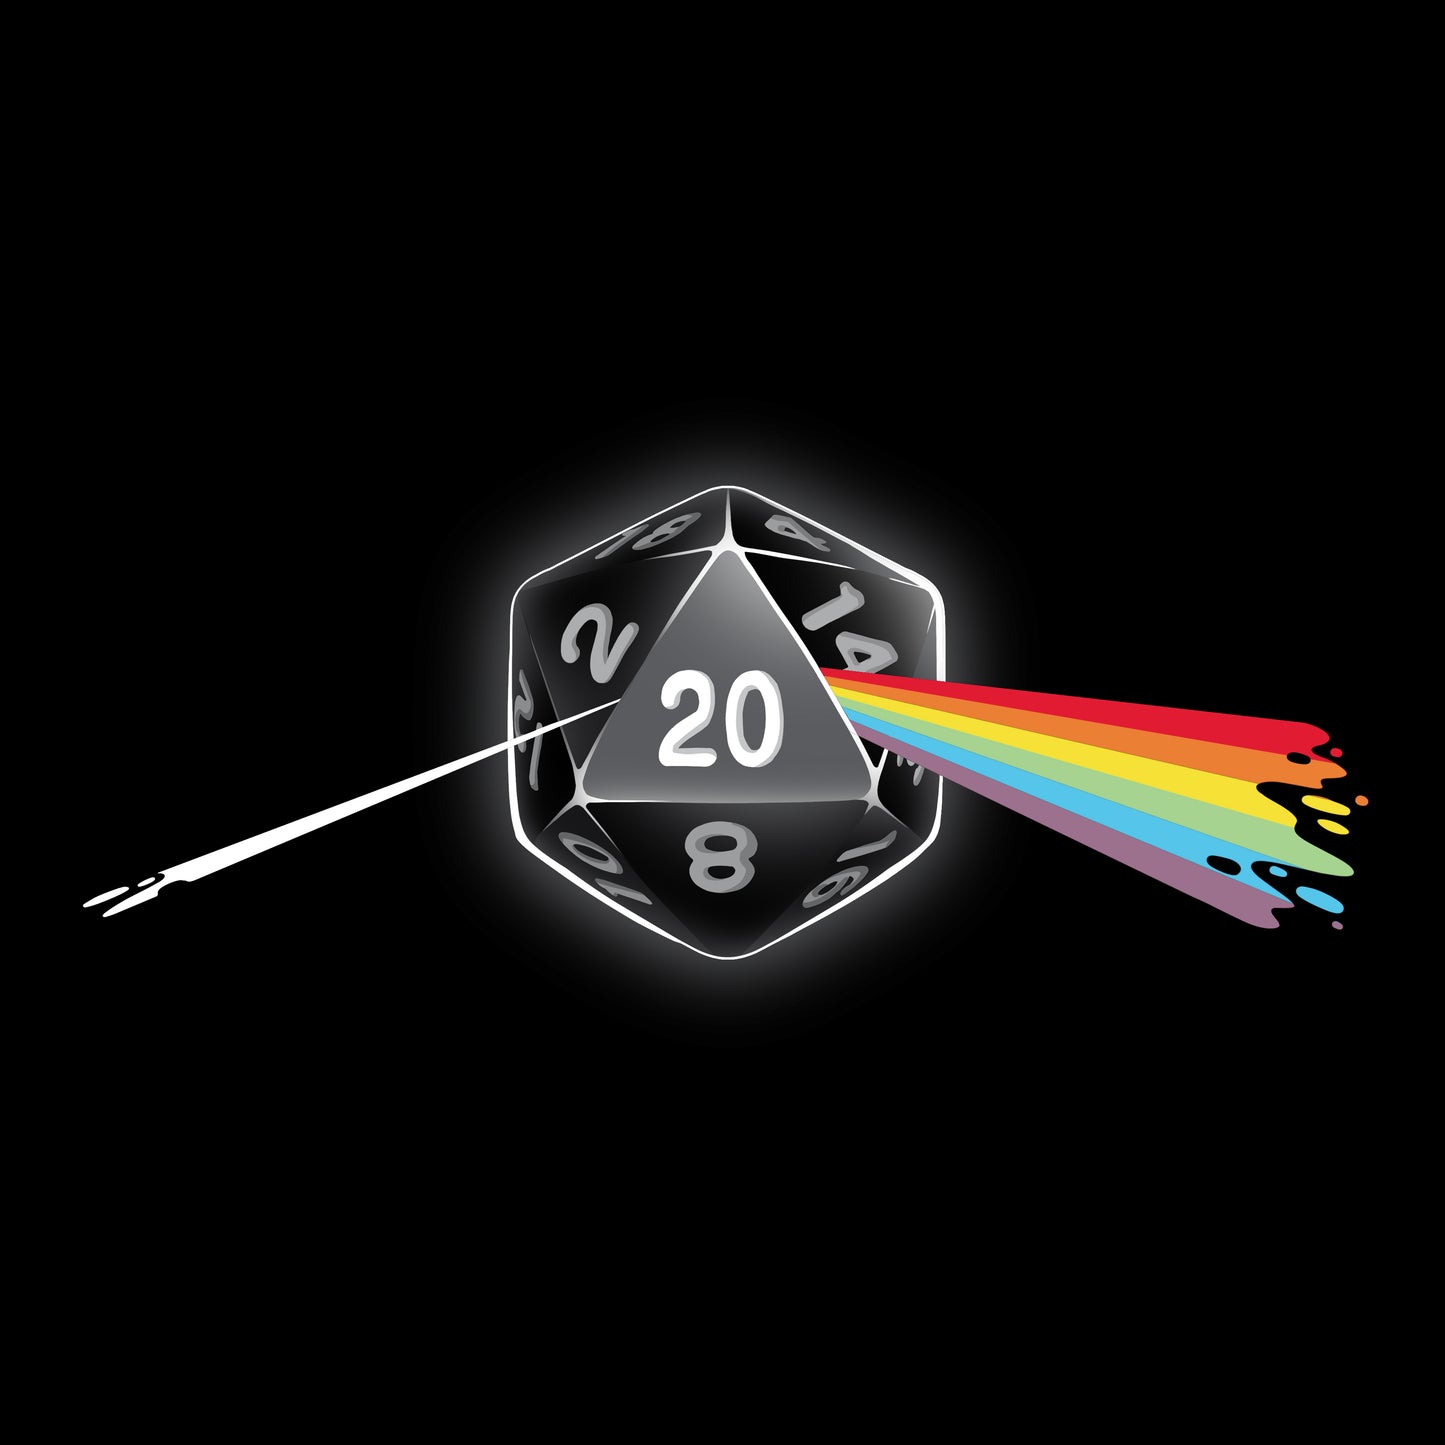 A roll of a Dark Side of the D20 with the number 20 on it, featured on a TeeTurtle t-shirt.